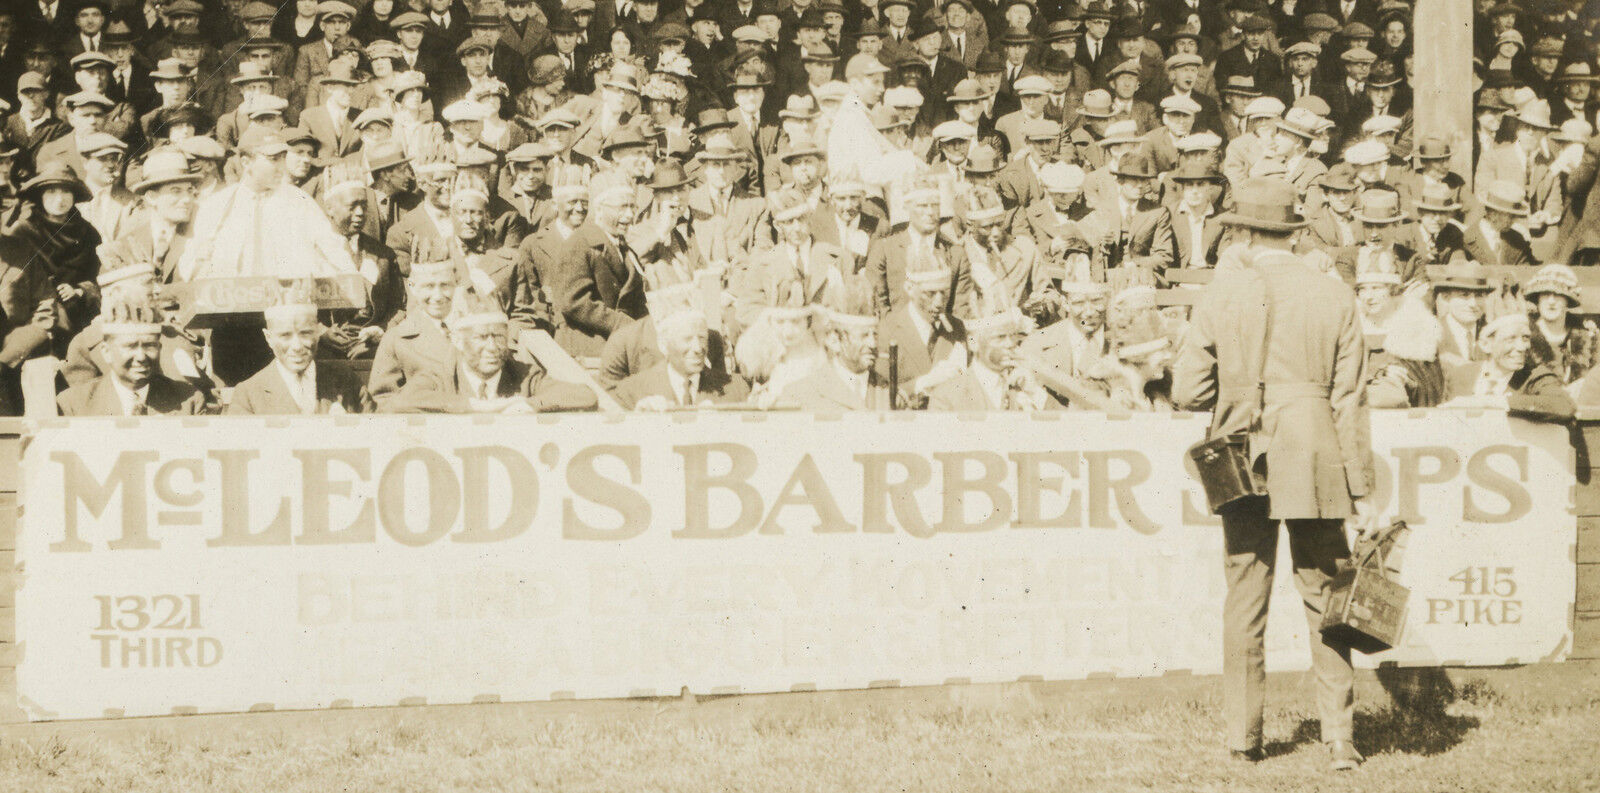 ANTIQUE  SEATTLE GIANTS BASEBALL PHOTOGRAPHER BARBER SHOP AFRICAN AMERICAN PHOTO